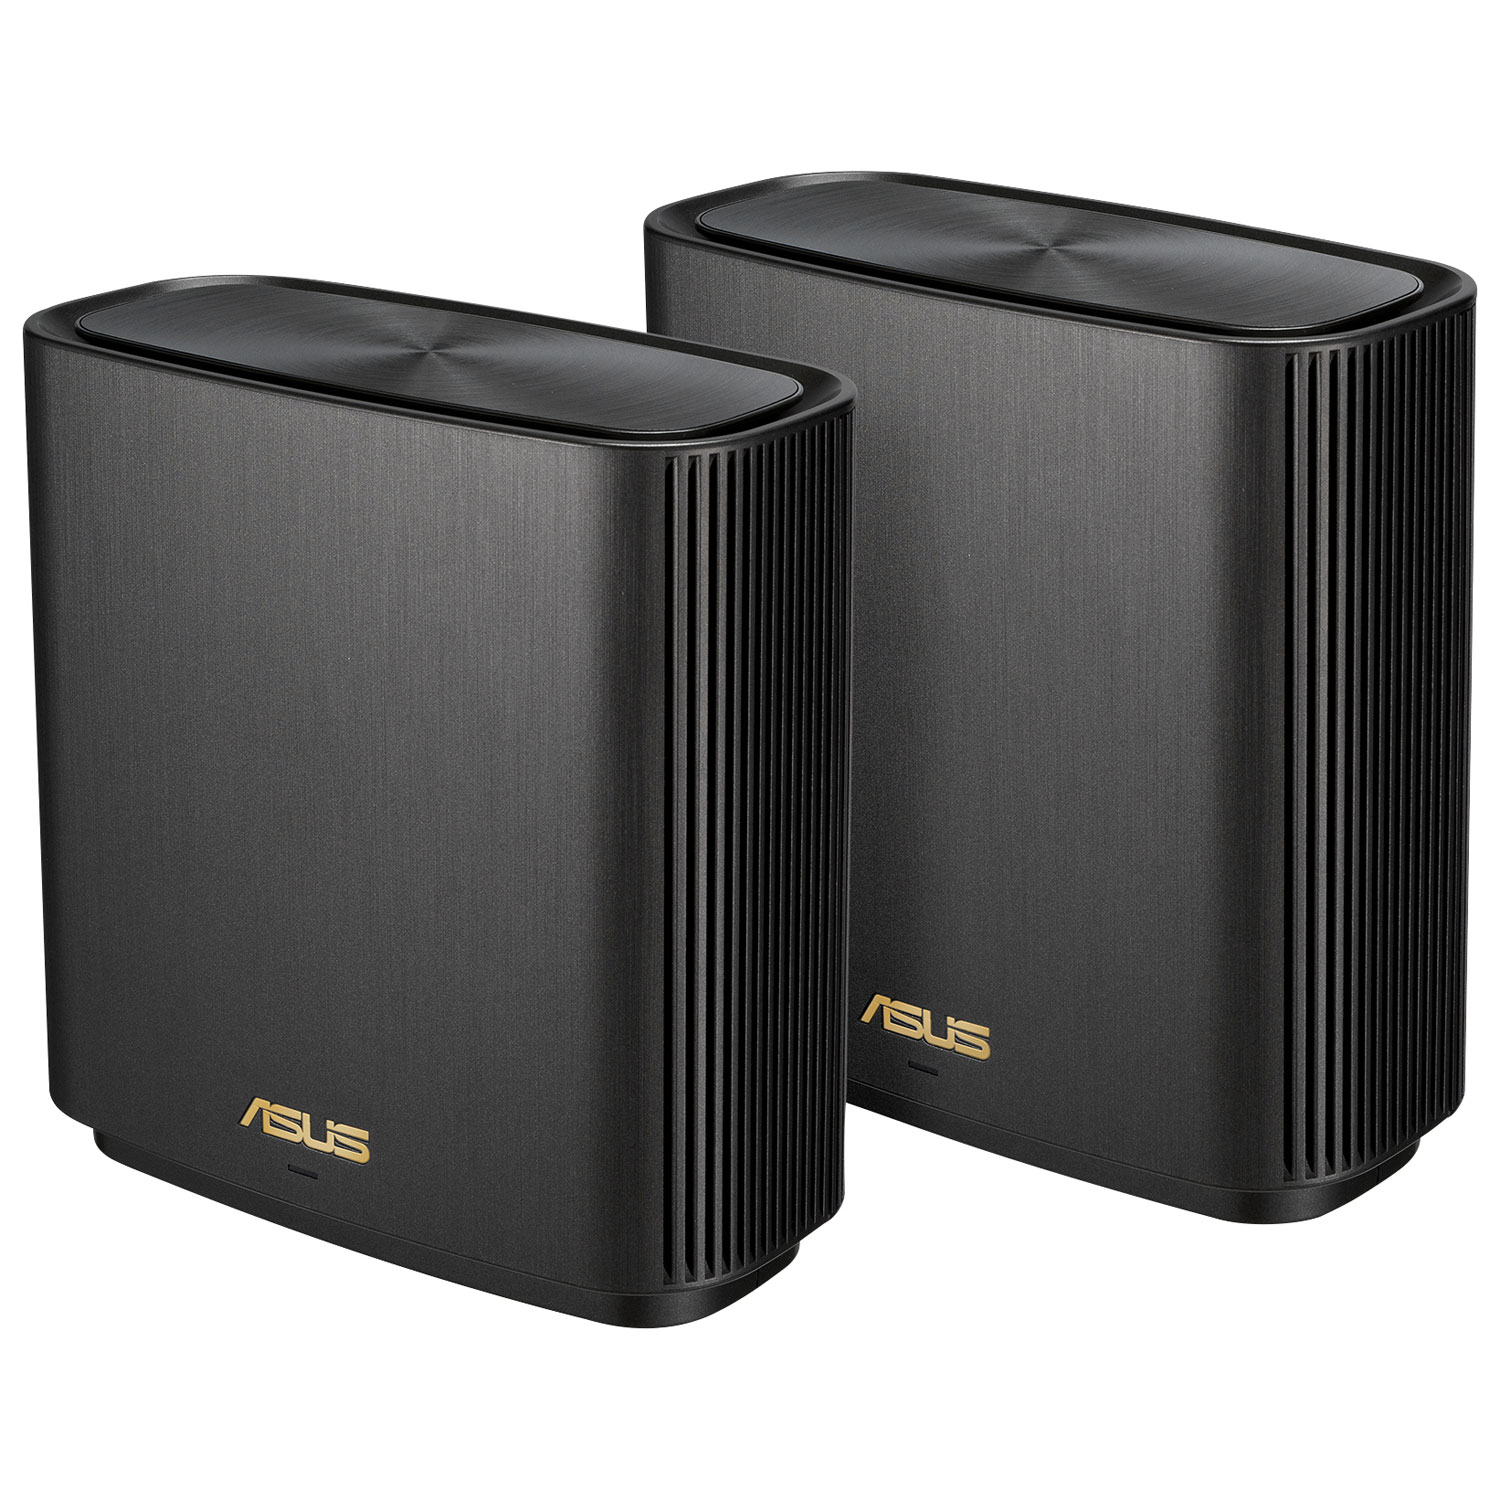 ASUS ZenWifi Wireless Wi-Fi 6 Tri-Band Router (XT8) - 2 Pack - Charcoal